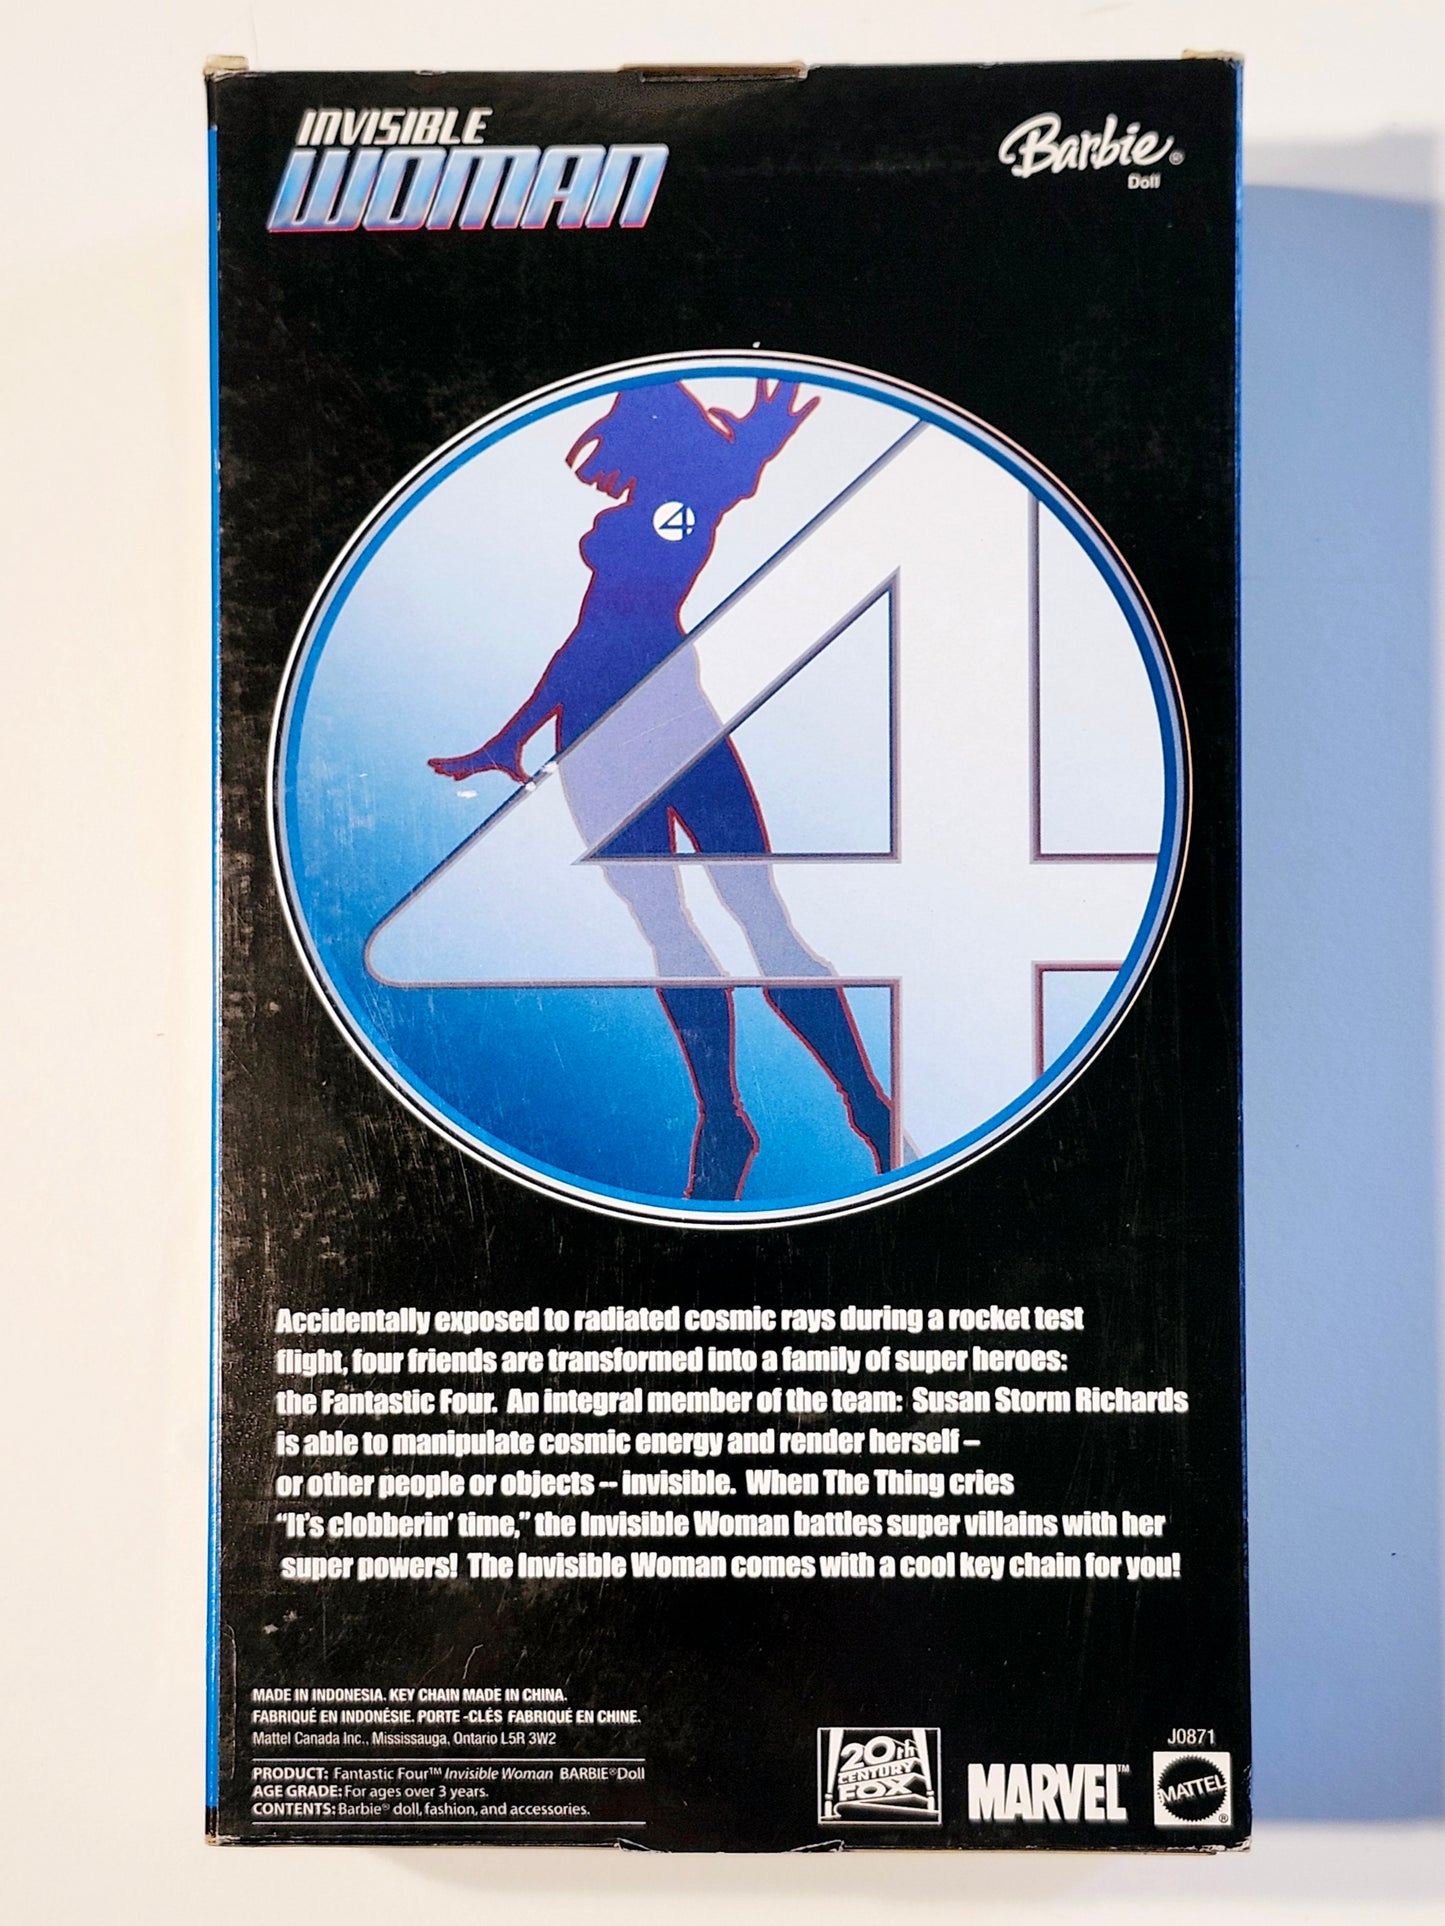 Barbie as Invisible Woman from the Fantastic Four 11.5-Inch Doll